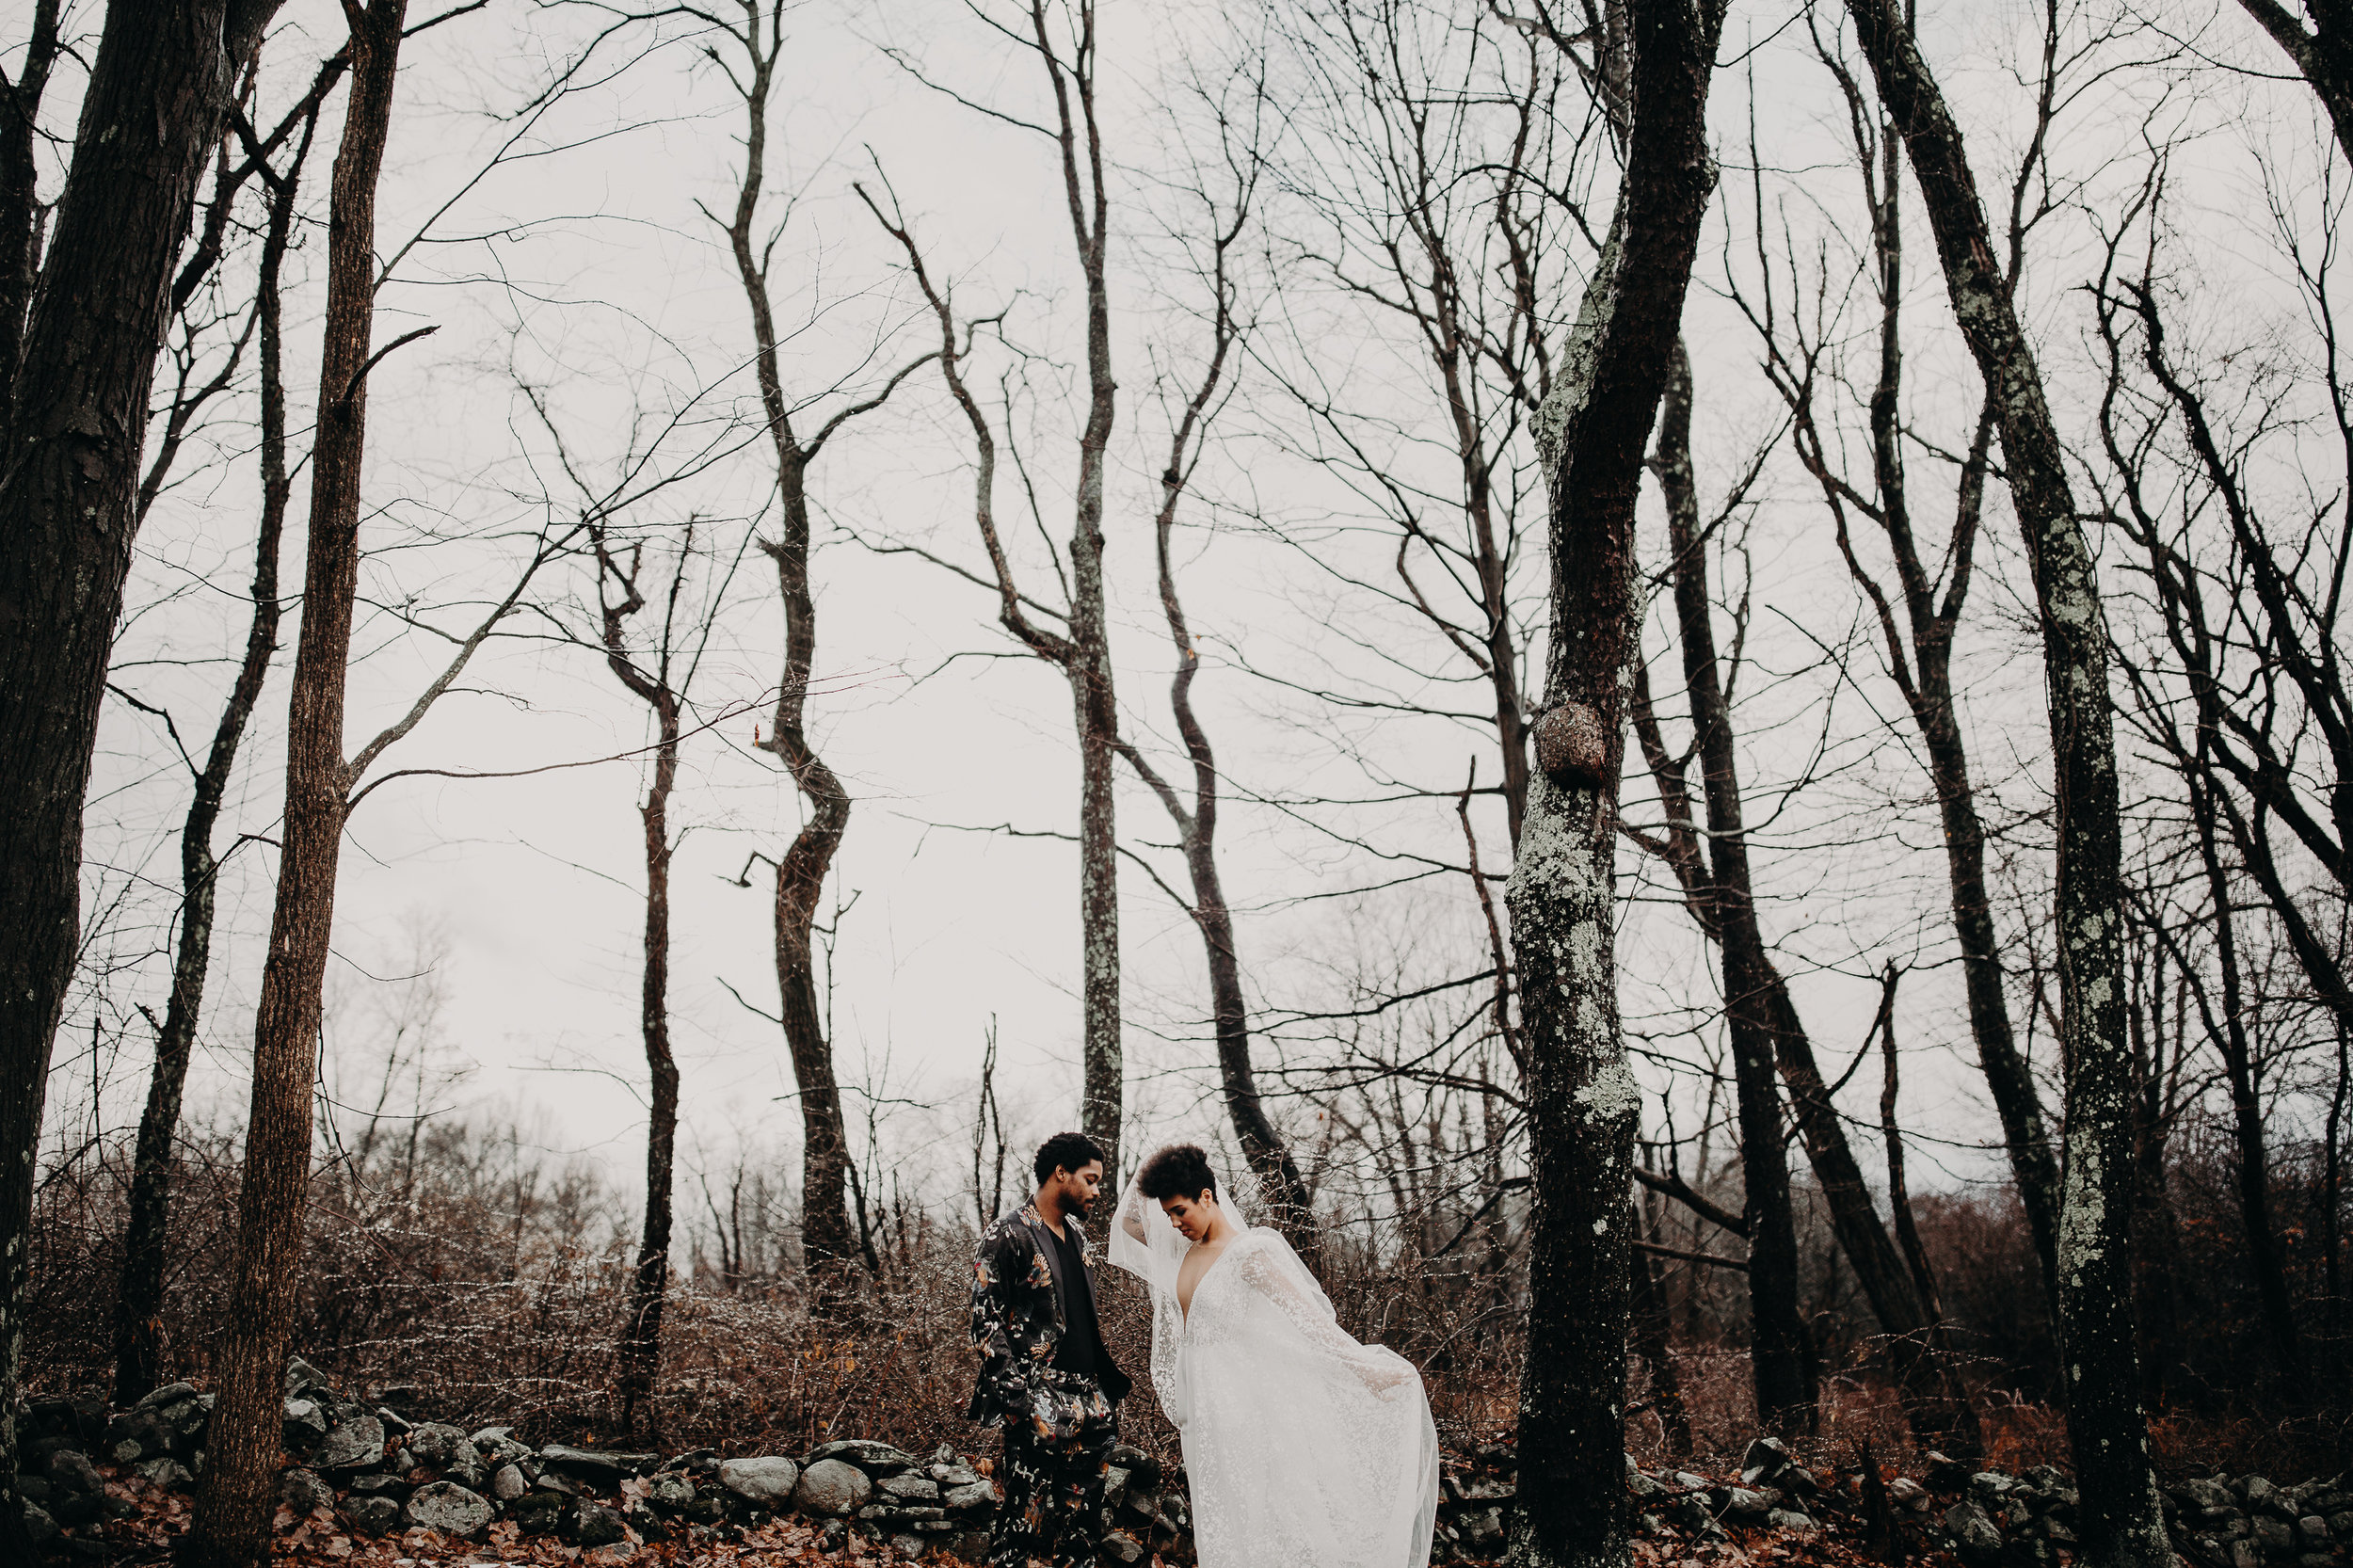 B&B winter fashionable elopement in Hudson, New York - Pearl Weddings & Events